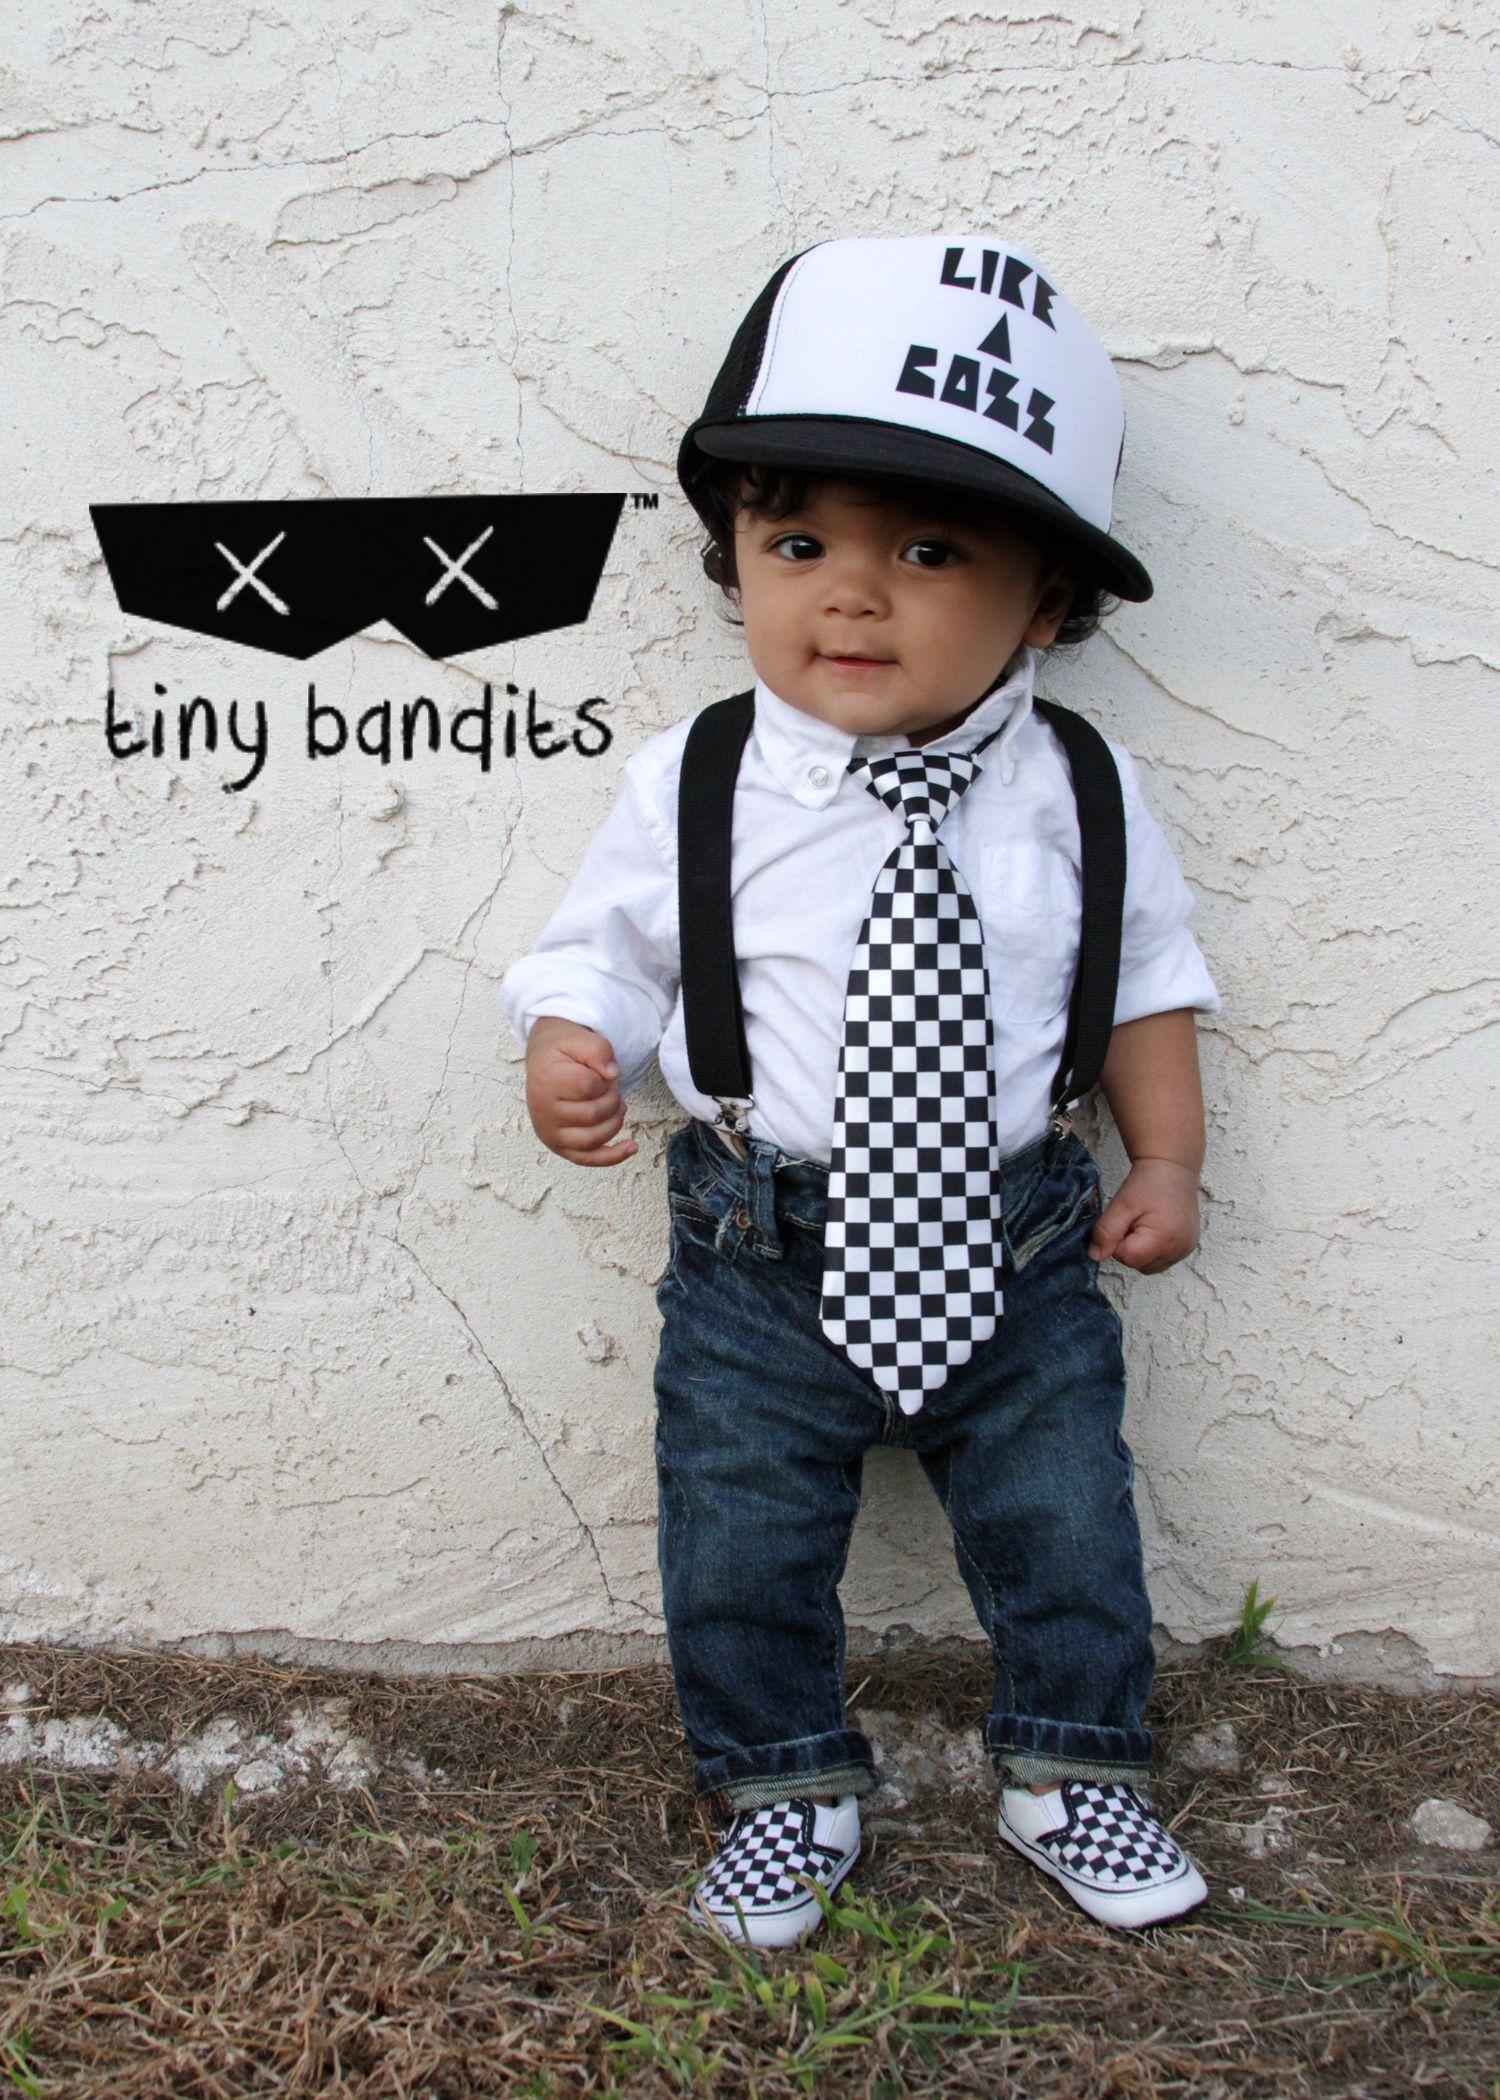 Widescreen Image About Baby Boy Fashion Infant Picture With Cute